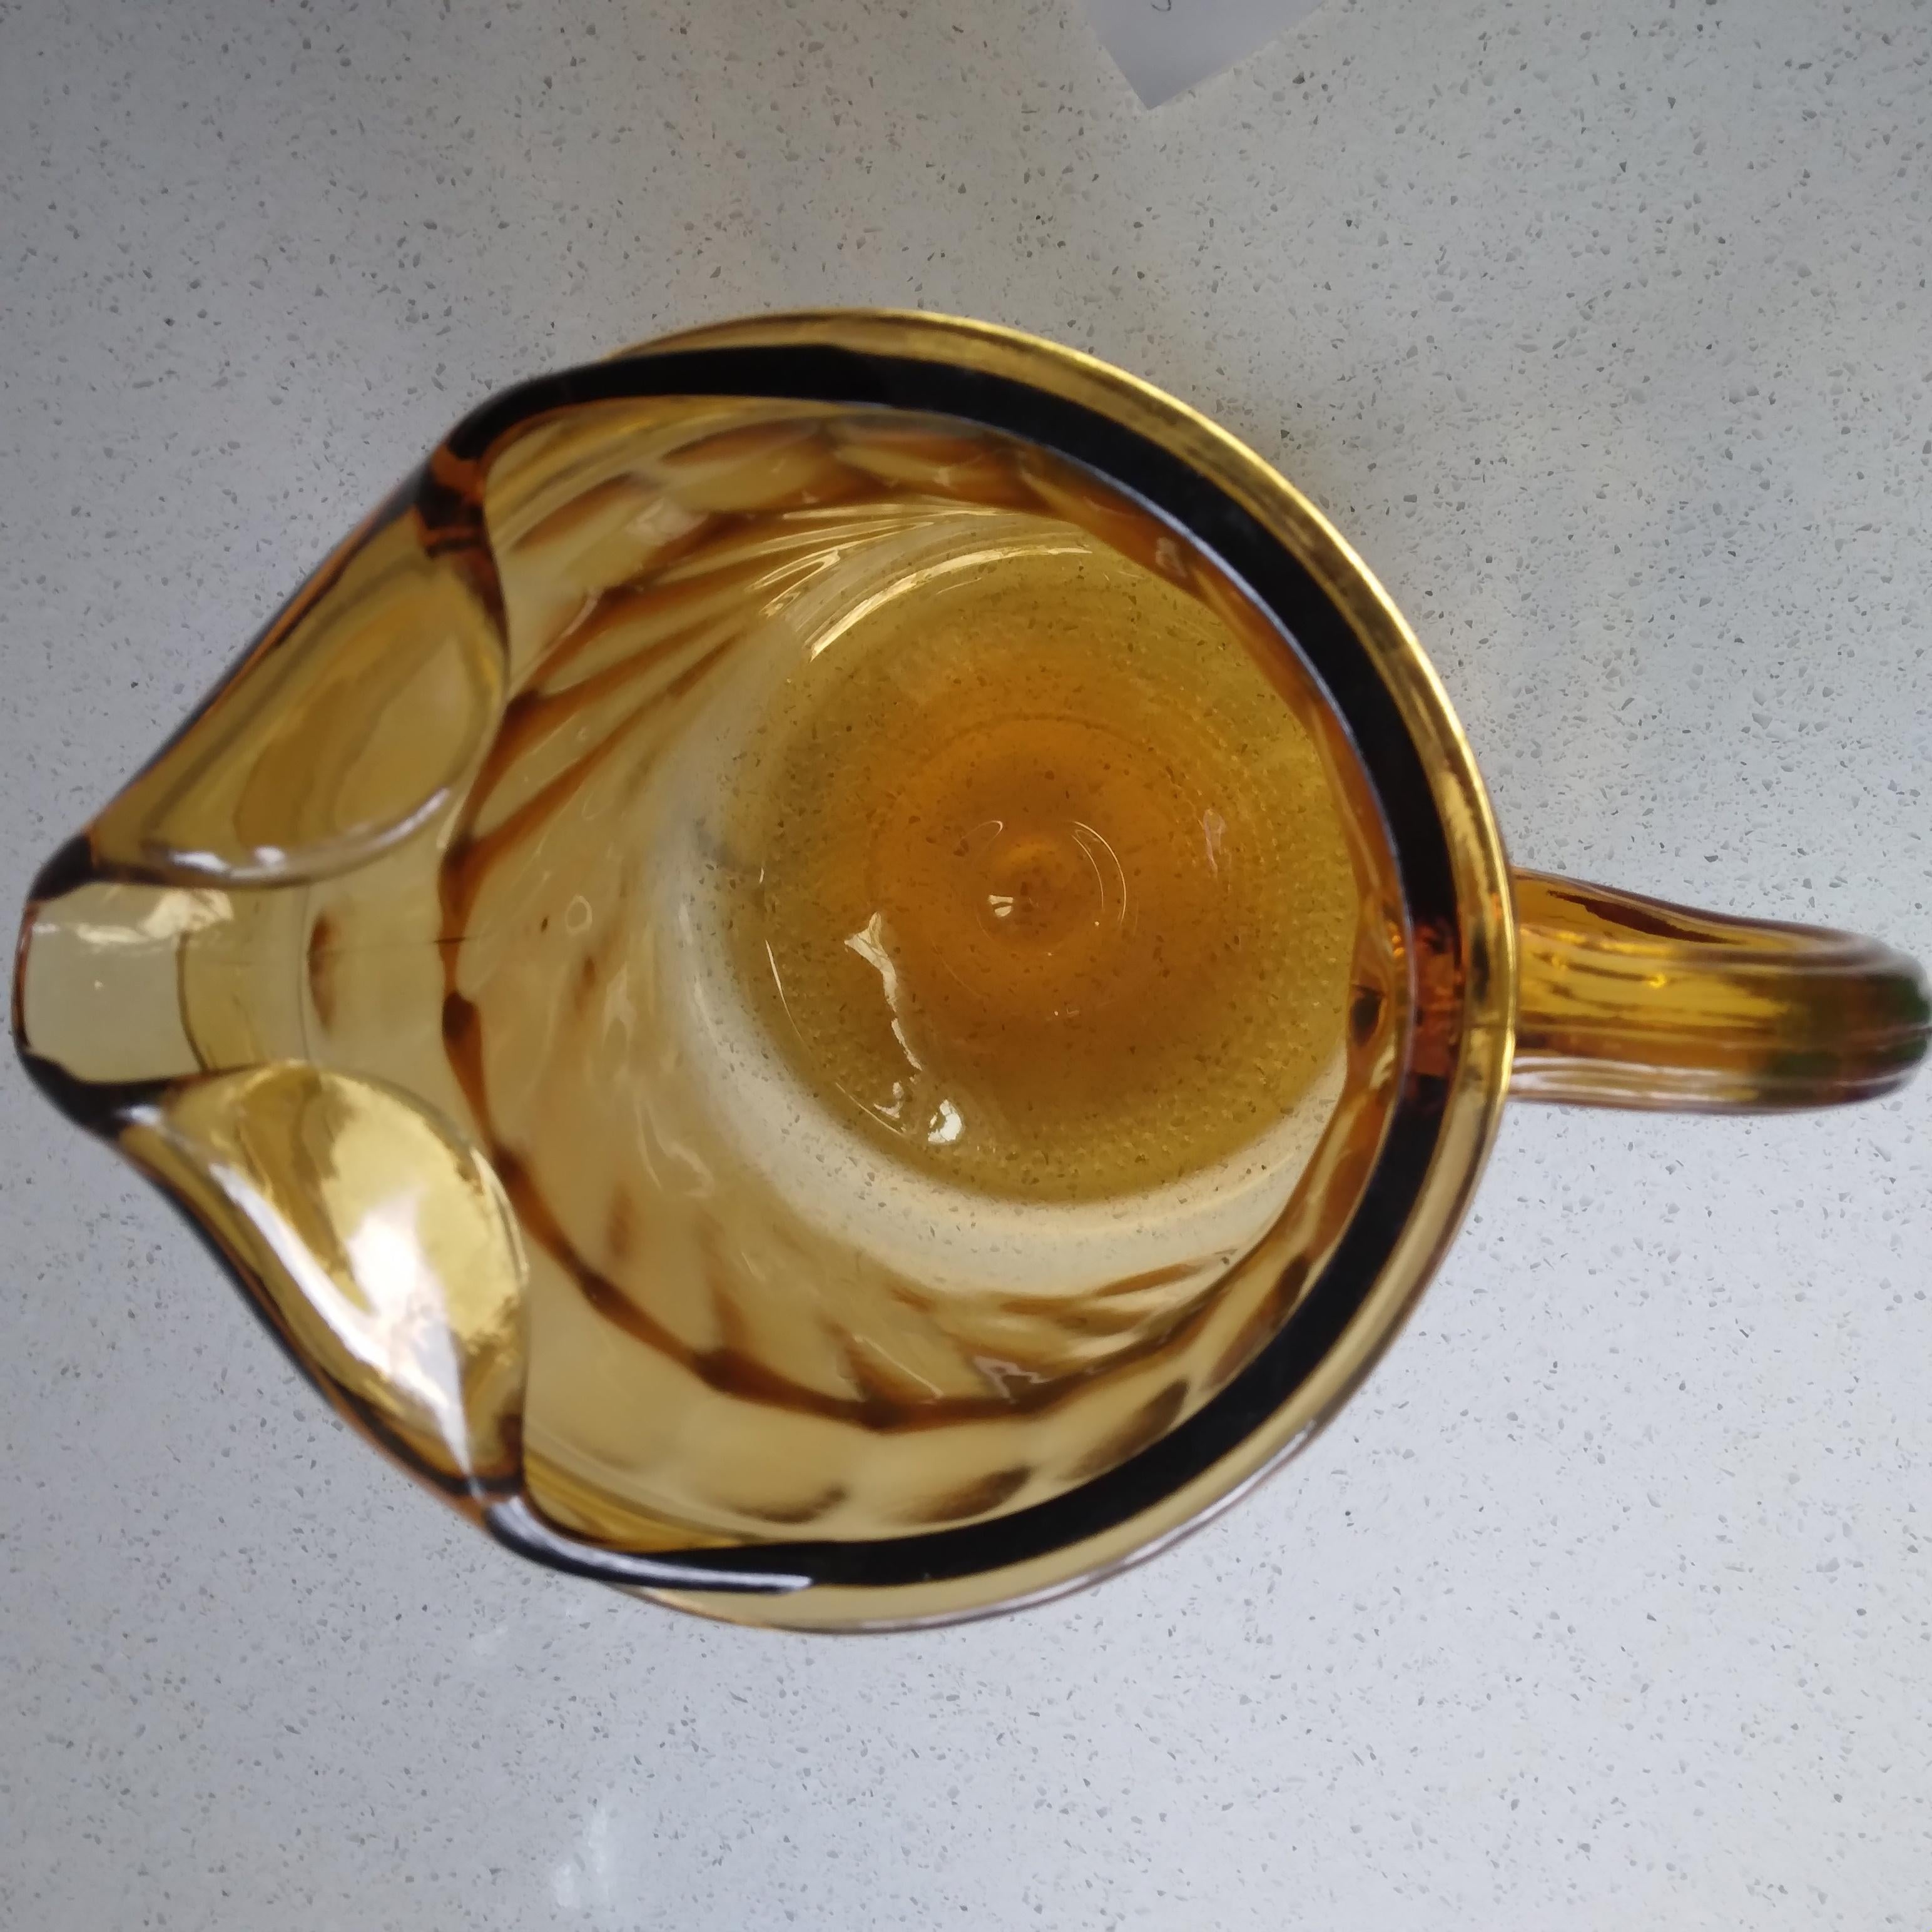 Adorably vintage, we love the rich amber color of this glass pitcher. The smooth swirl pattern of the glass is pretty but not distracting. Perfect for summer drinks with the convenient ice lip at the rim.

The thick walled glass is in excellent